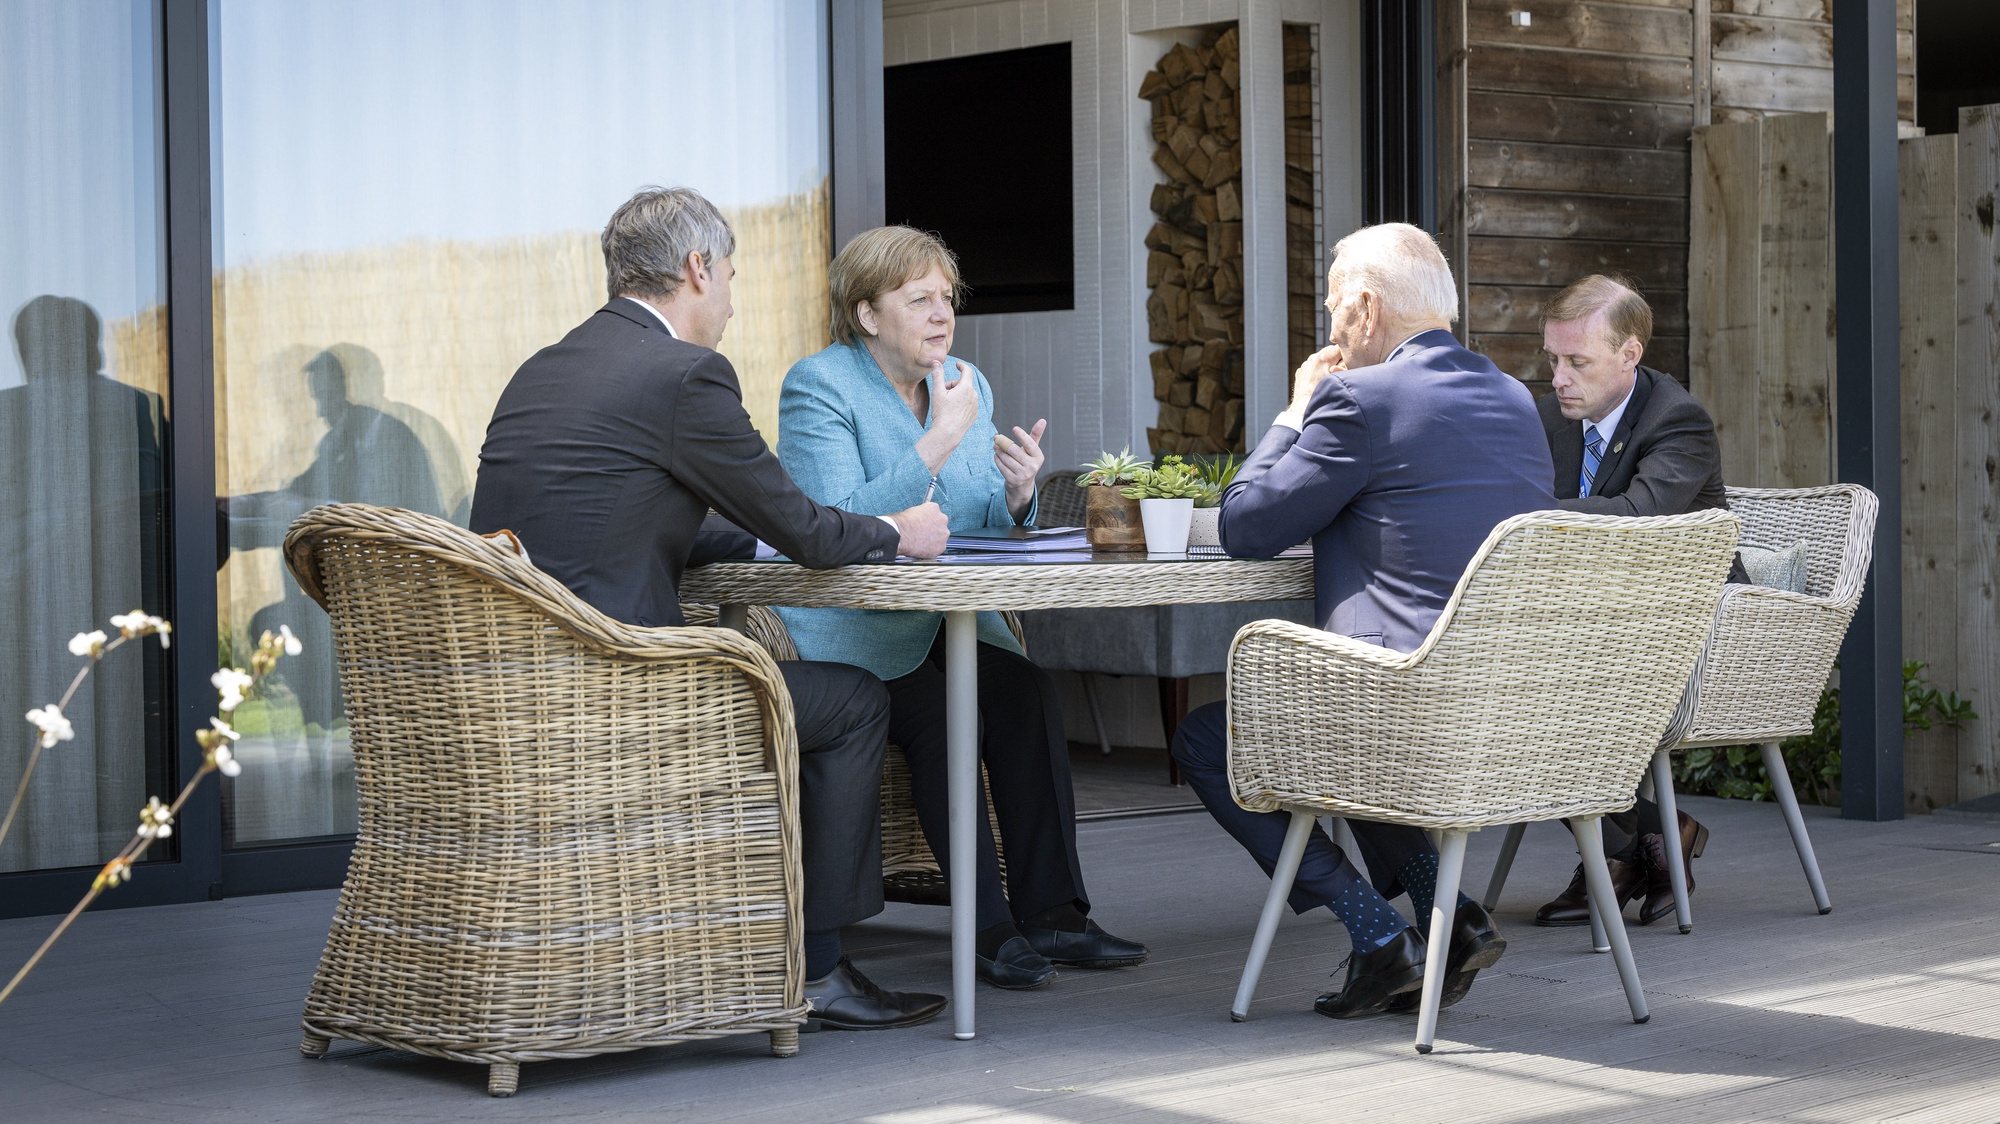 epa09264328 A handout photo made available by the German Government Press Office (BPA) shows German Chancellor Angela Merkel (2-L) and US President Joe Biden (2-R) at the beginning of their meeting on the sidelines of the G7 summit, in St. Ives, Cornwall, Britain, 12 June 2021. In picture attending the meeting are foreign policy advisor to Chancellor Merkel, Jan Hecker (L) and US National Security Advisor Jake Sullivan (R).  EPA/GUIDO BERGMANN/BPA HANDOUT  HANDOUT EDITORIAL USE ONLY/NO SALES